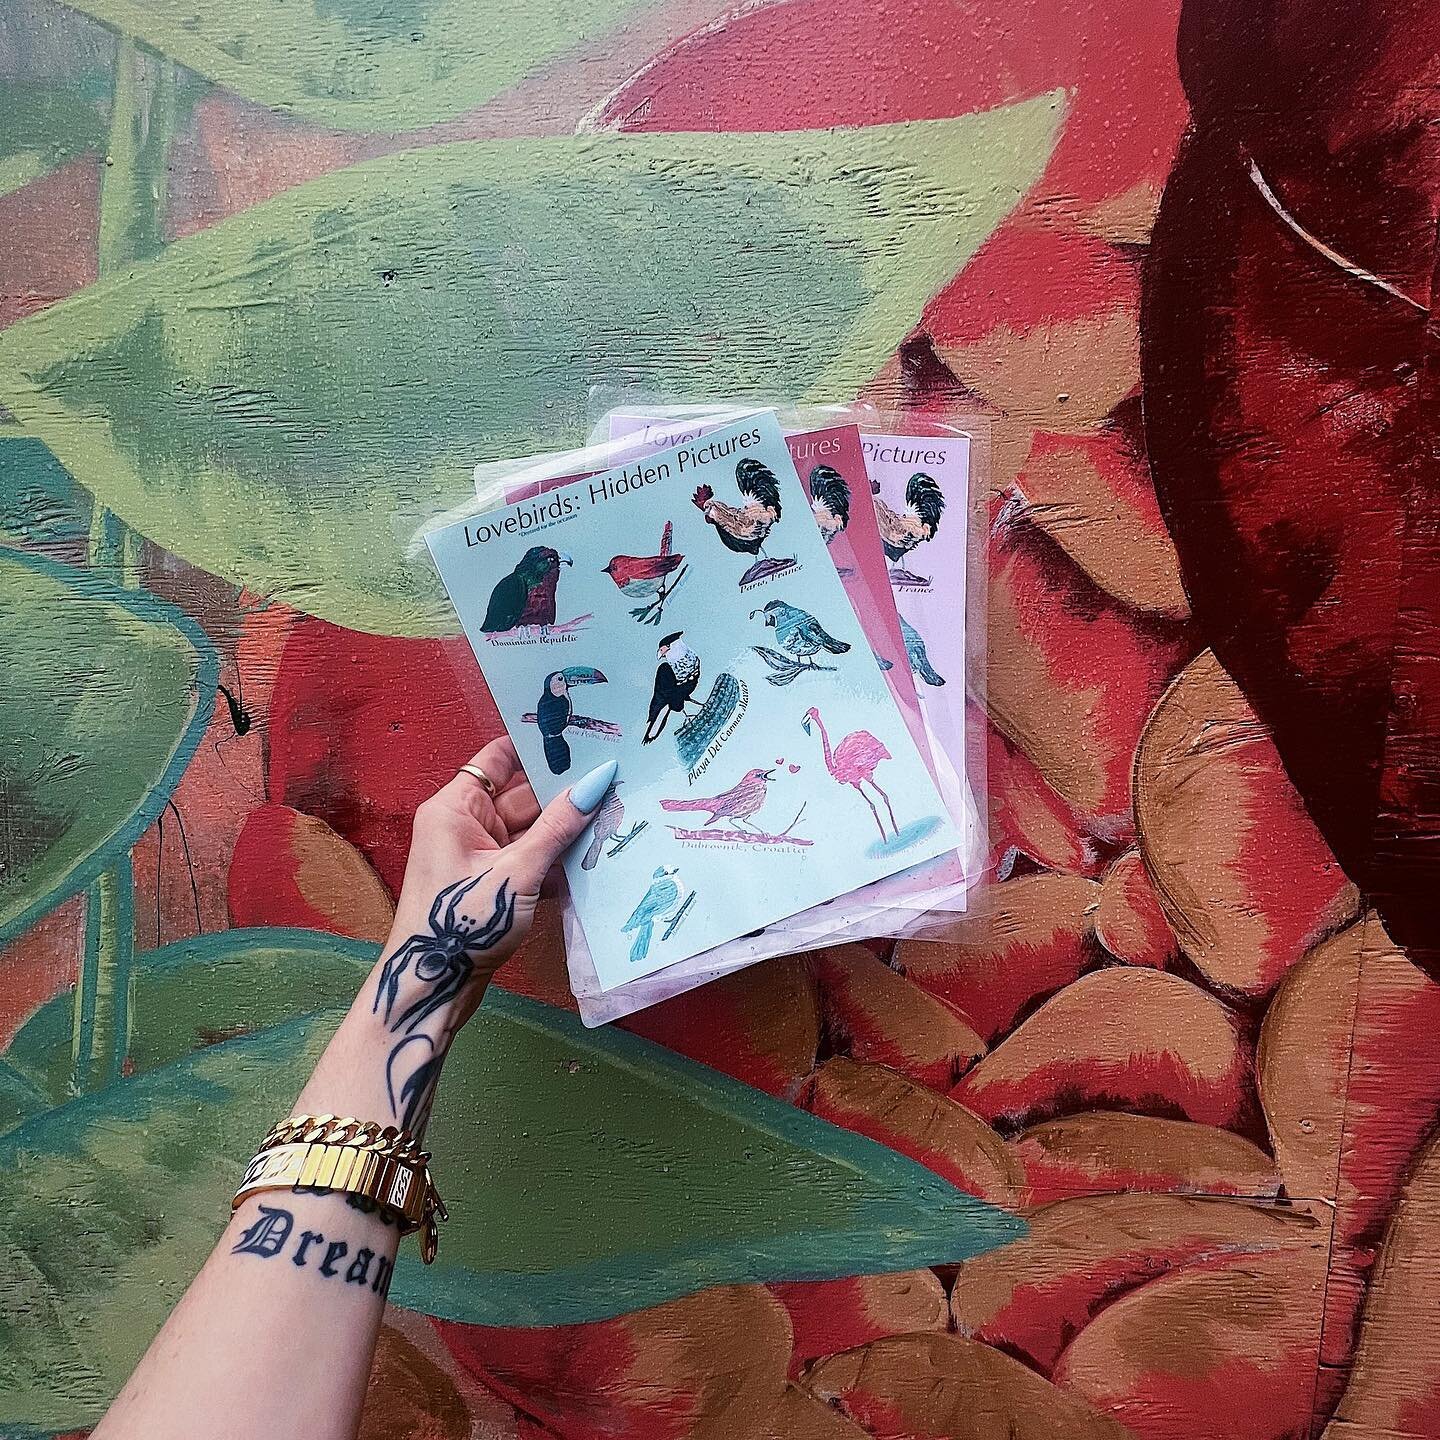 Dropped off some keys for the hidden love bird bbs! So much in motion right now, sometimes we&rsquo;ve gotta give ourselves a moment to smell the flowers 🌺 
.
.
.
P.S. big tings on theeee way!!! Save the date: Sept 25th 👀